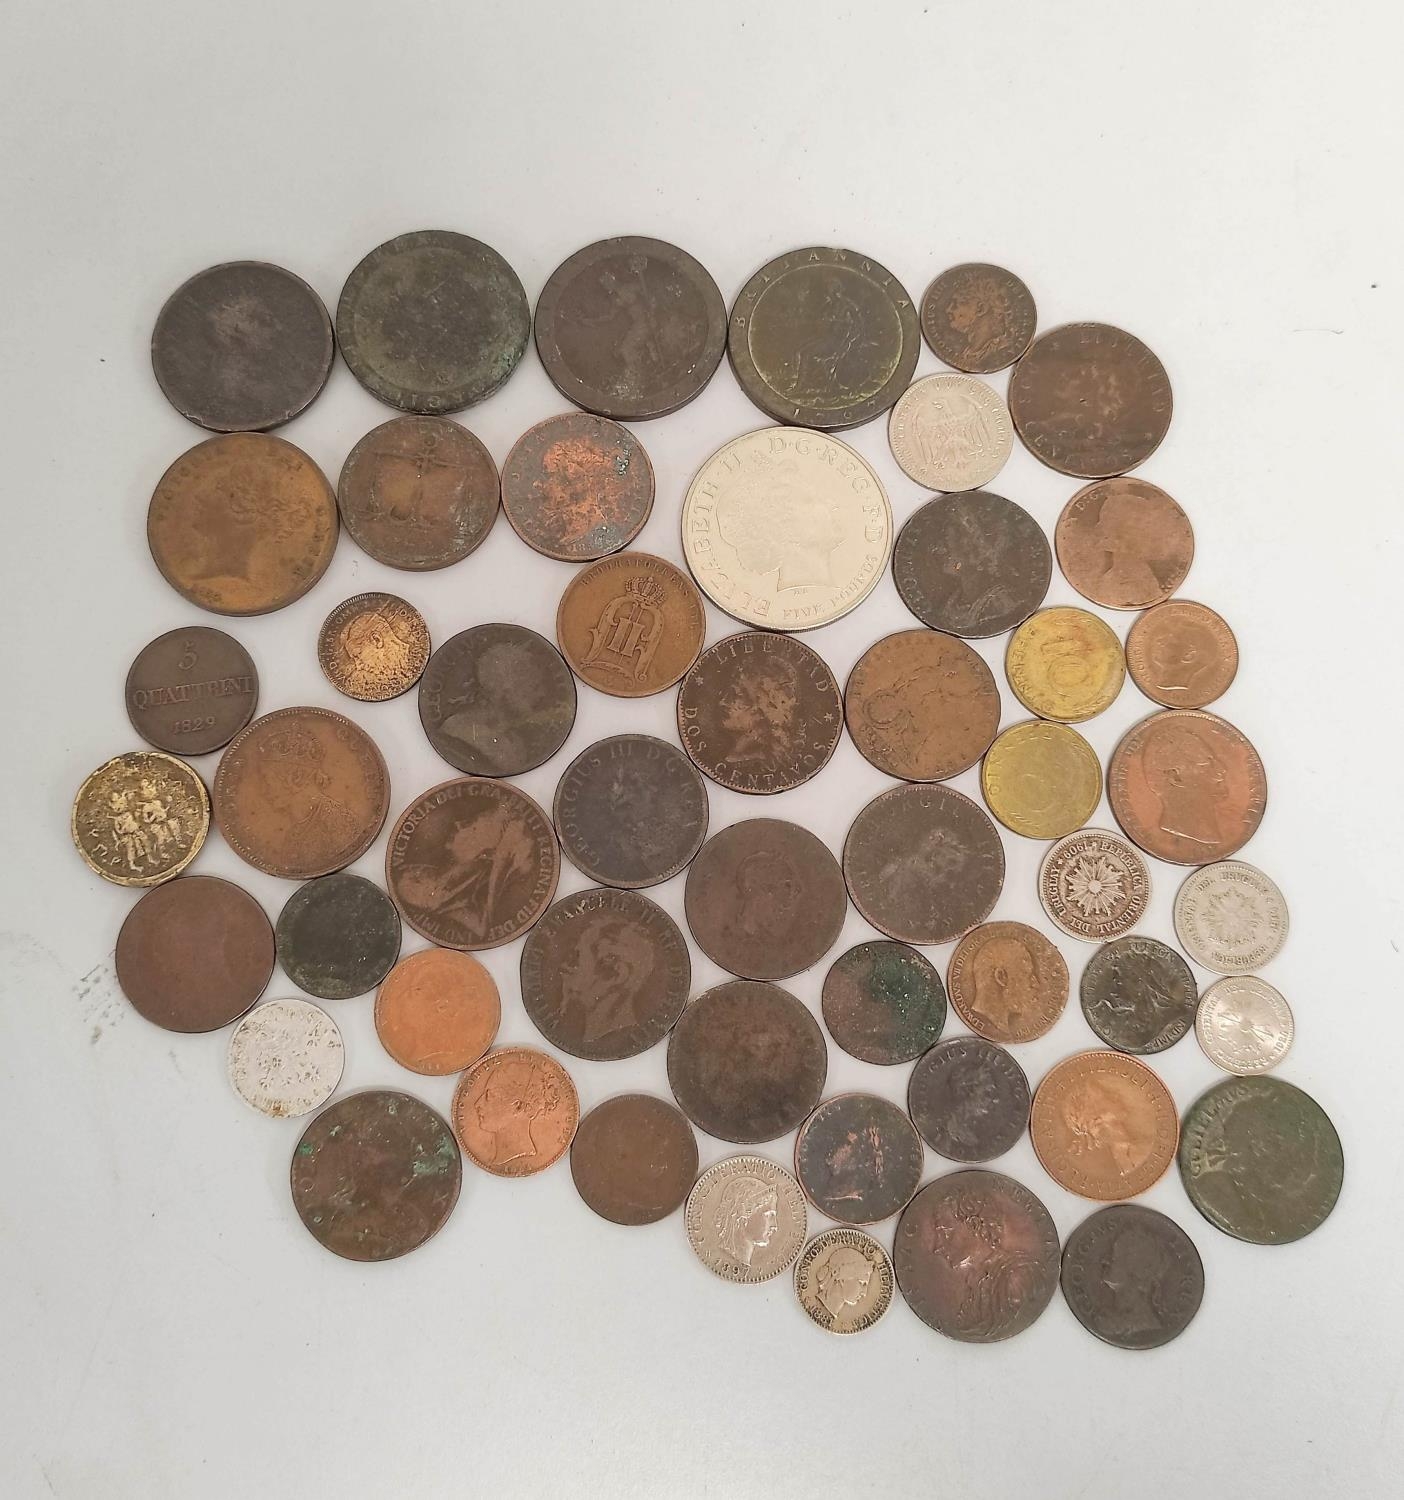 Collection of British and World coins to include a 1680s William & Mary halfpenny, a 1793